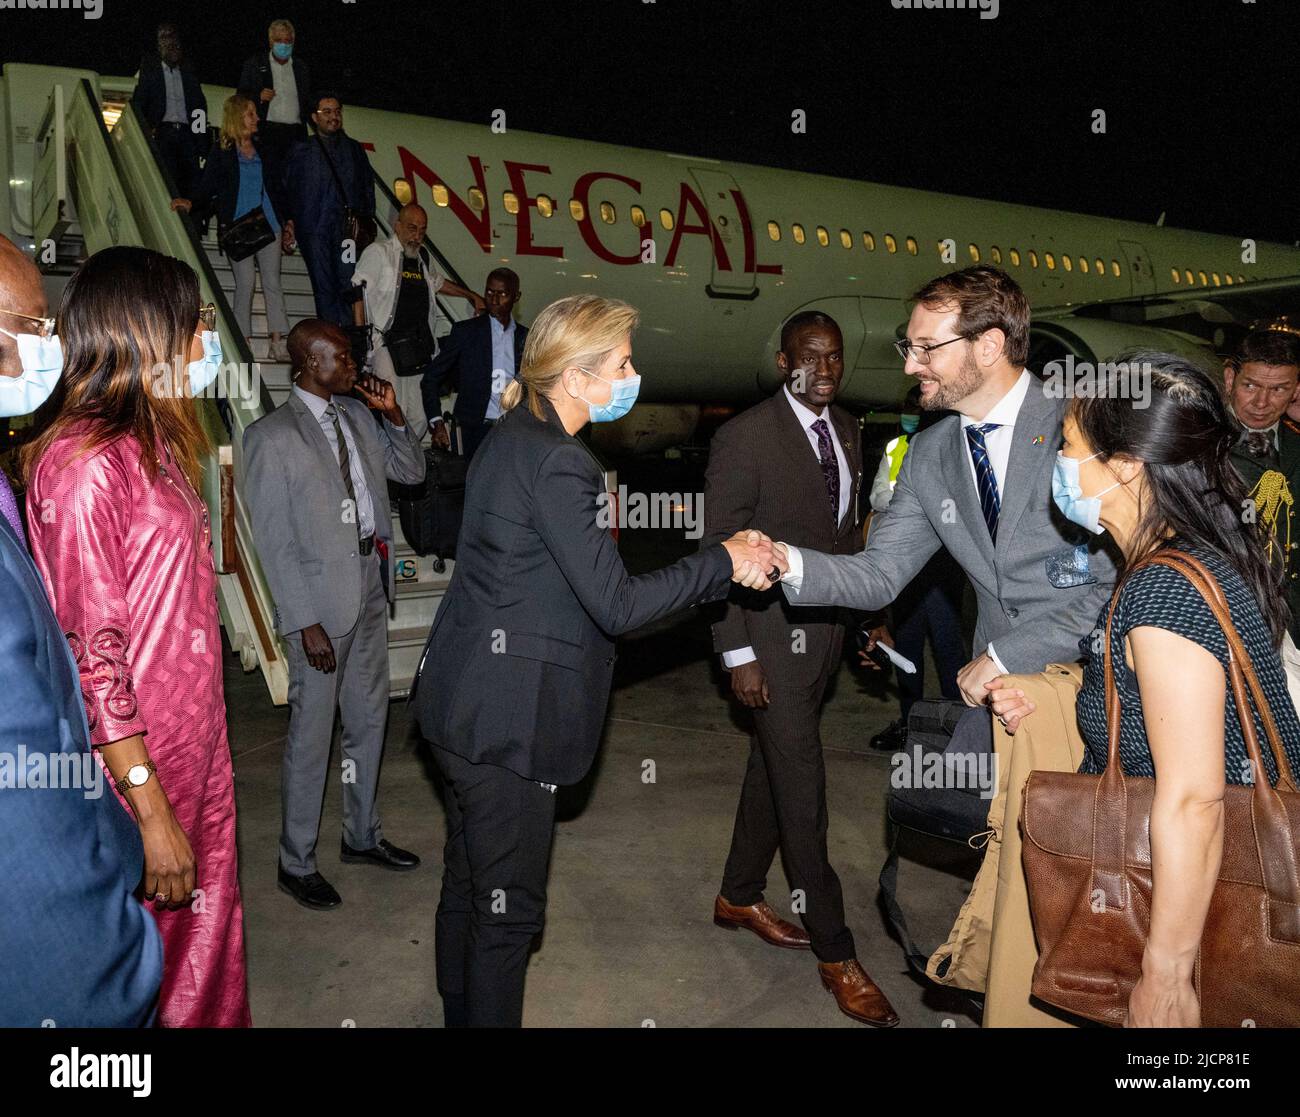 2022-06-15 01:06:13 DAKAR - Queen Maxima arrives at Dakar's Blaise Diagne Airport in Senegal. Maxima visits Ivory Coast, and Senegal, in her role as the United Nations Secretary-General's Special Advocate for Inclusive Finance for Development. ANP POOL MISCHA SCHOEMAKER netherlands out - belgium out Stock Photo